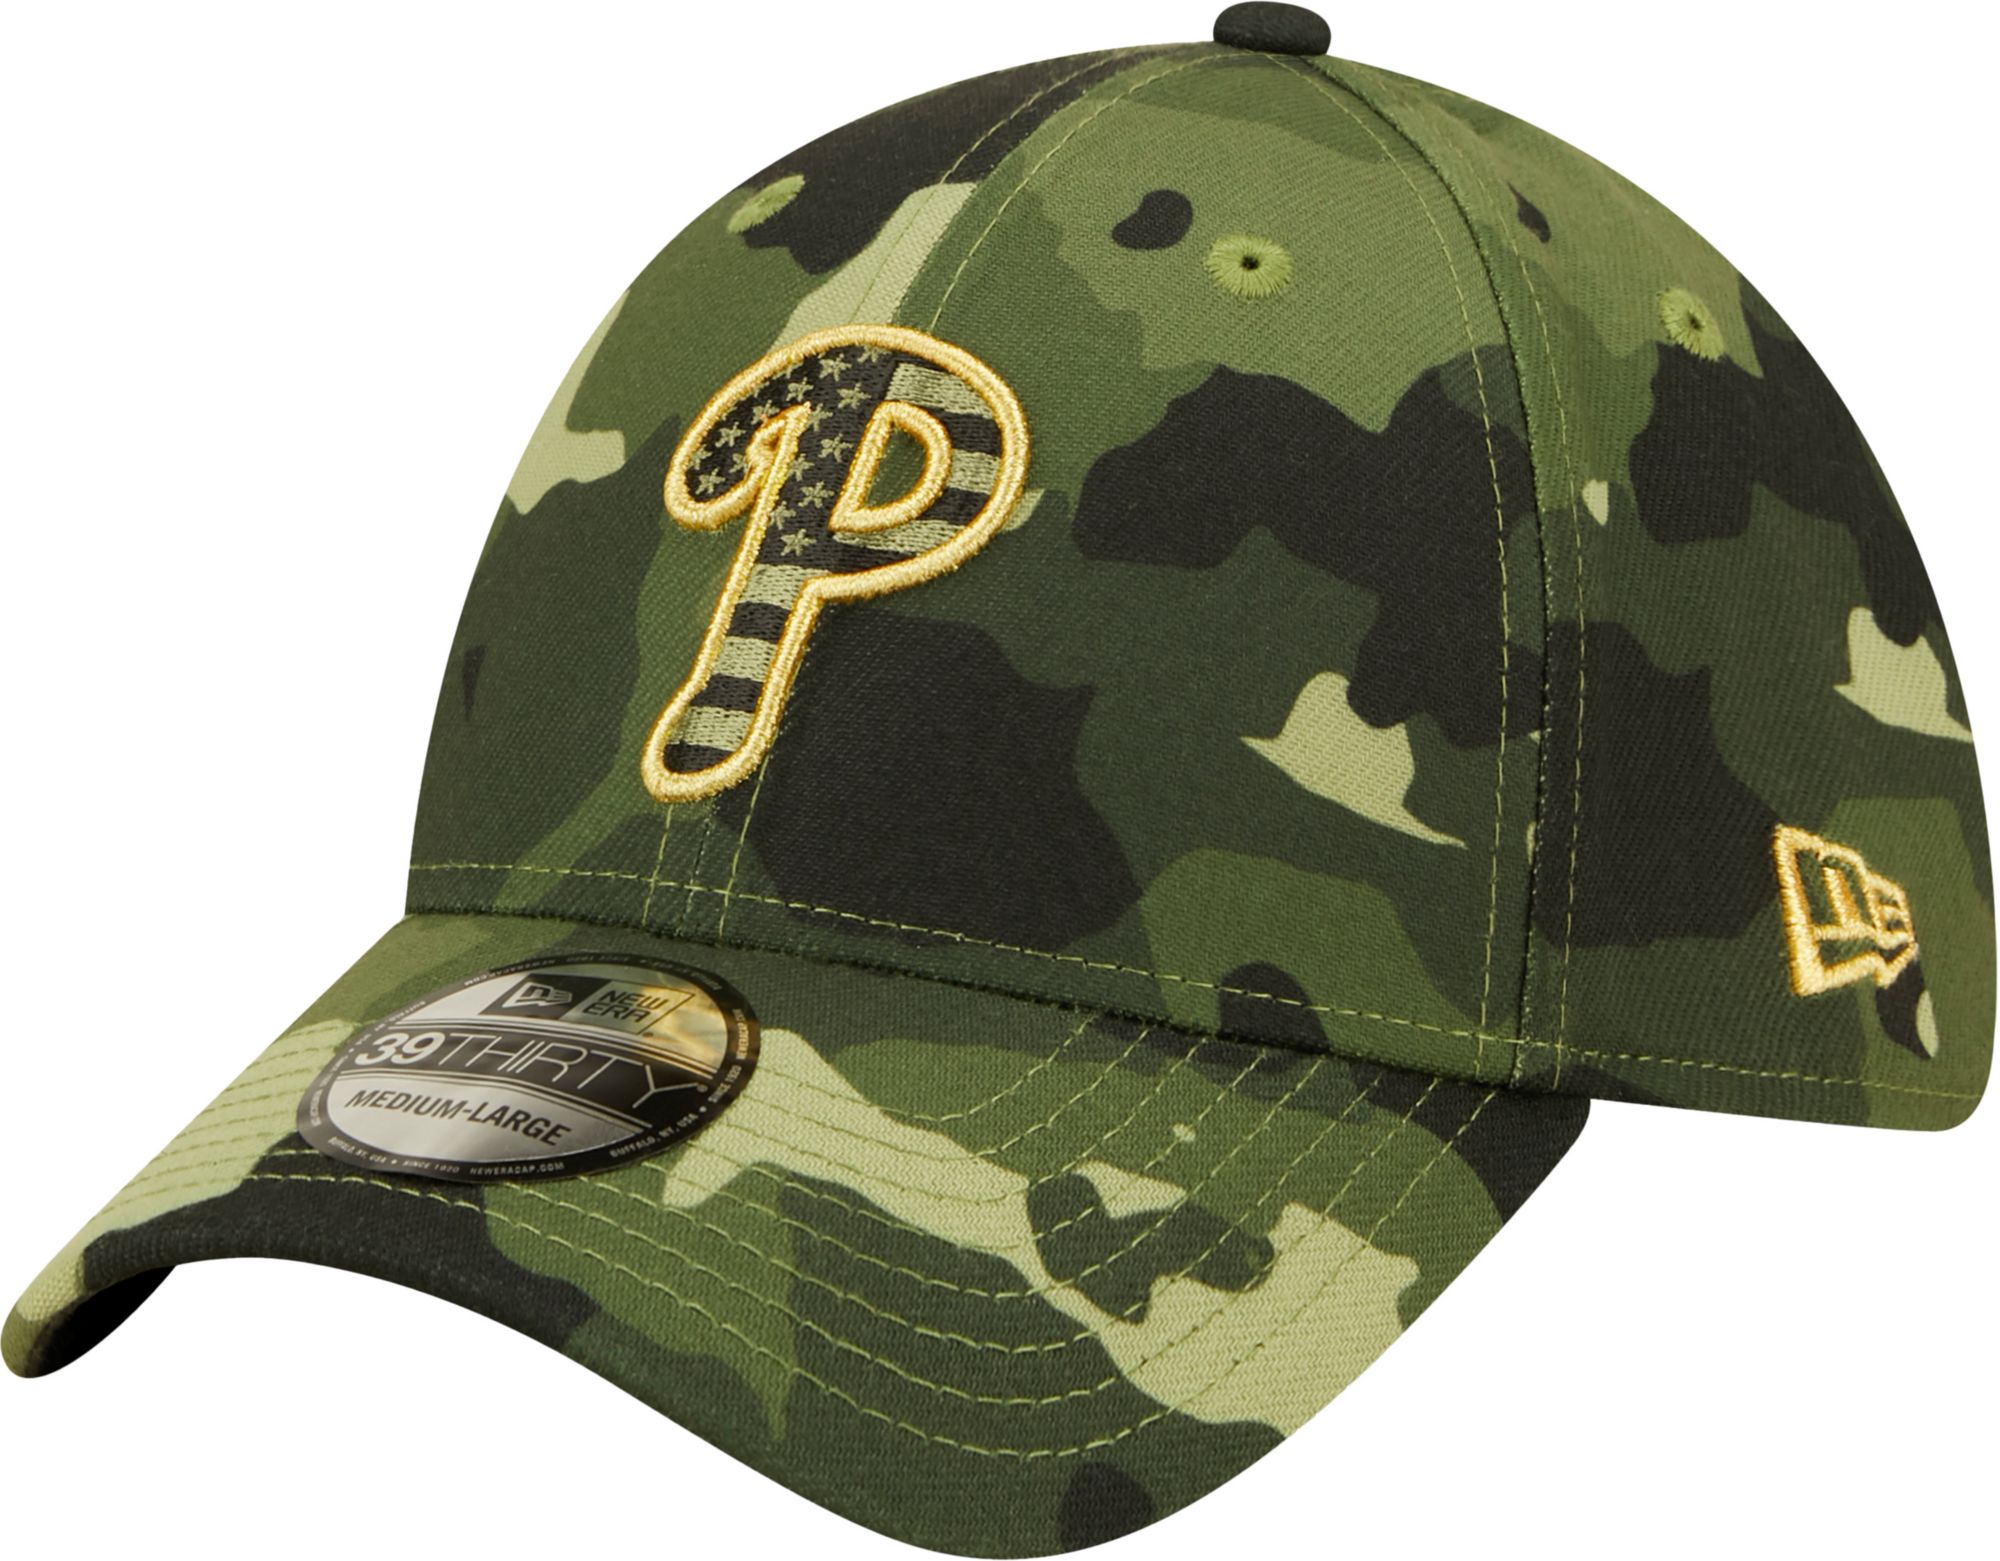 Philadelphia Phillies: Get your MLB Armed Forces Day gear now